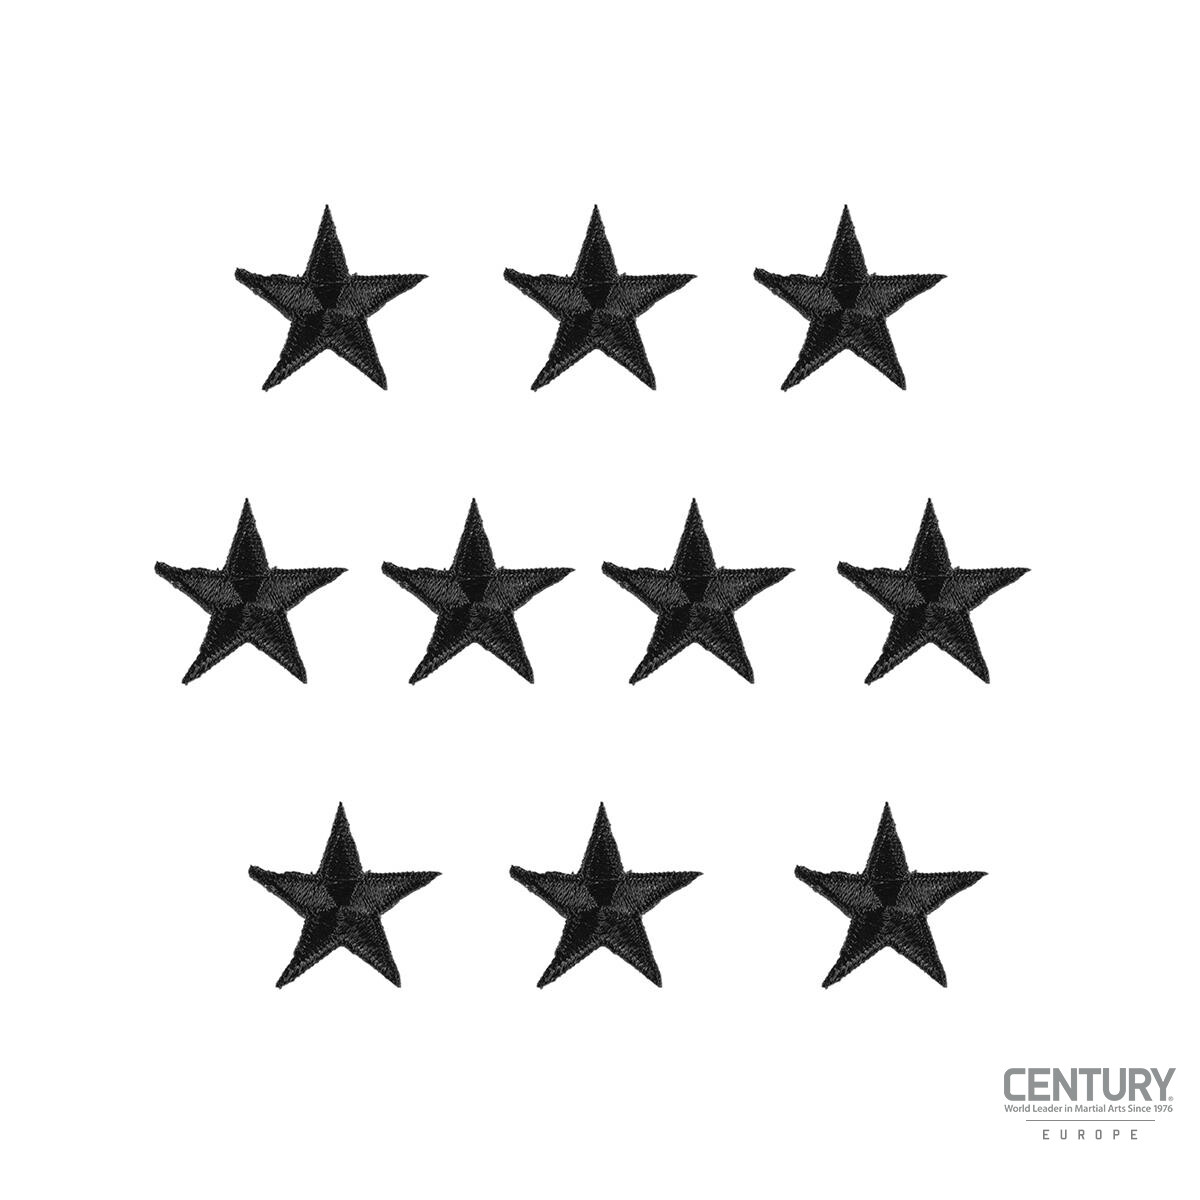 Star Patches 10 Pack Black